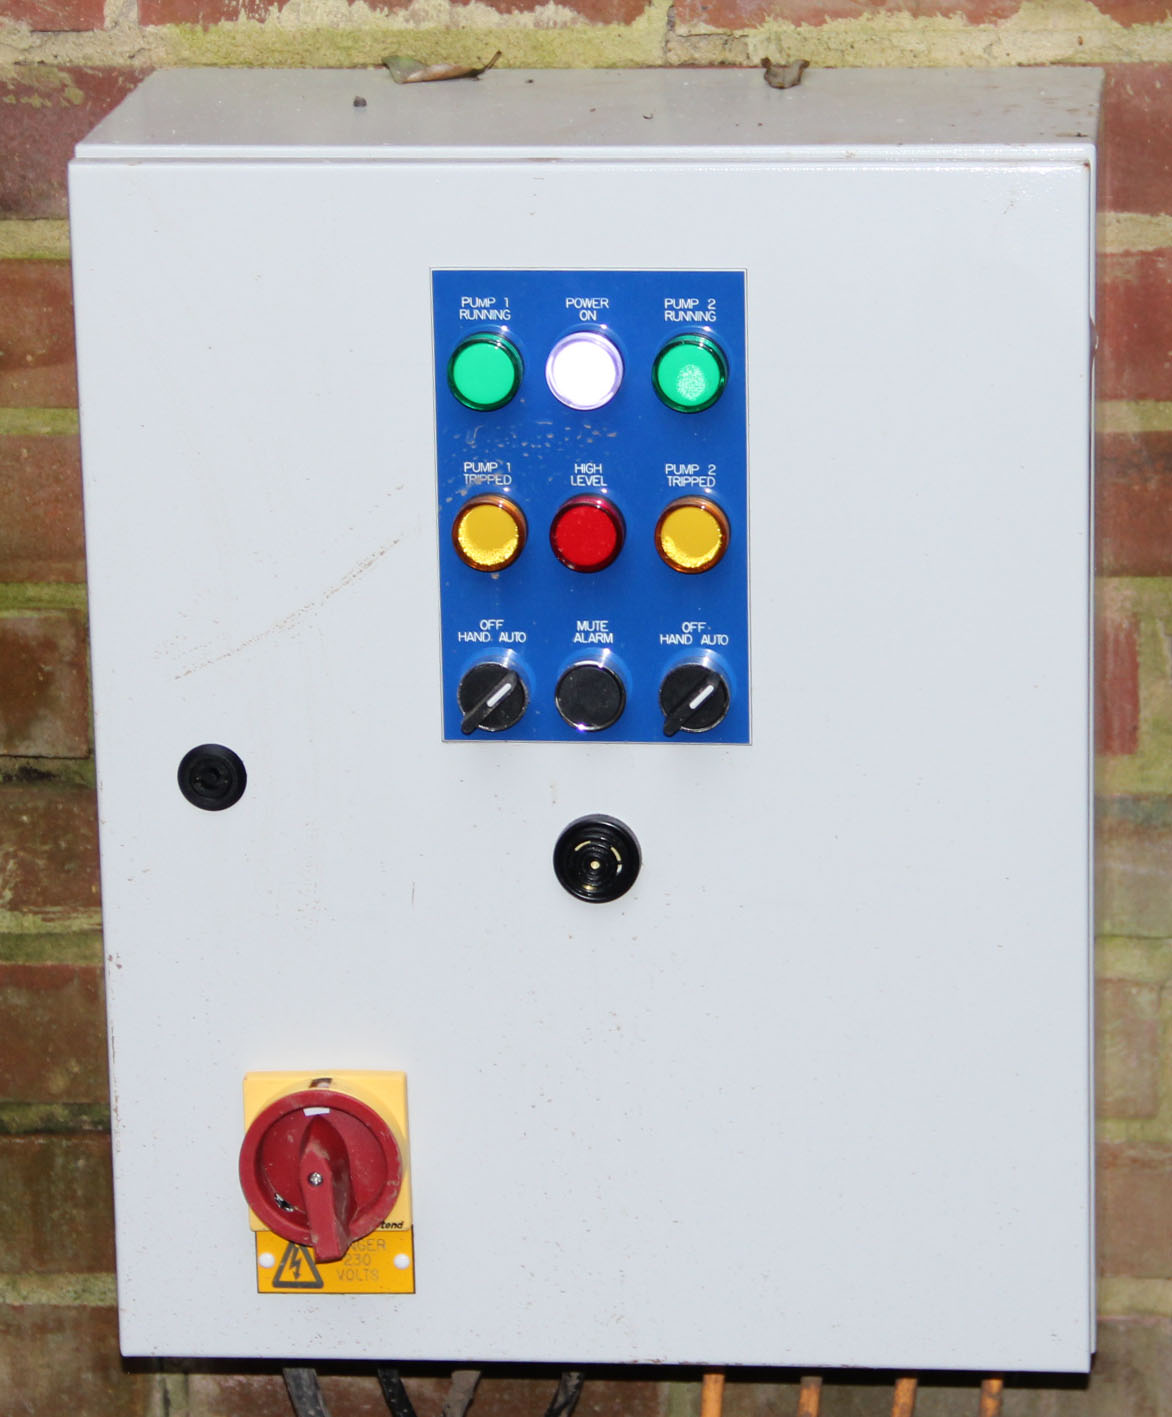 This is an image of an electric panel box and pump that can be set up to alert you if there is anything wrong with the system.